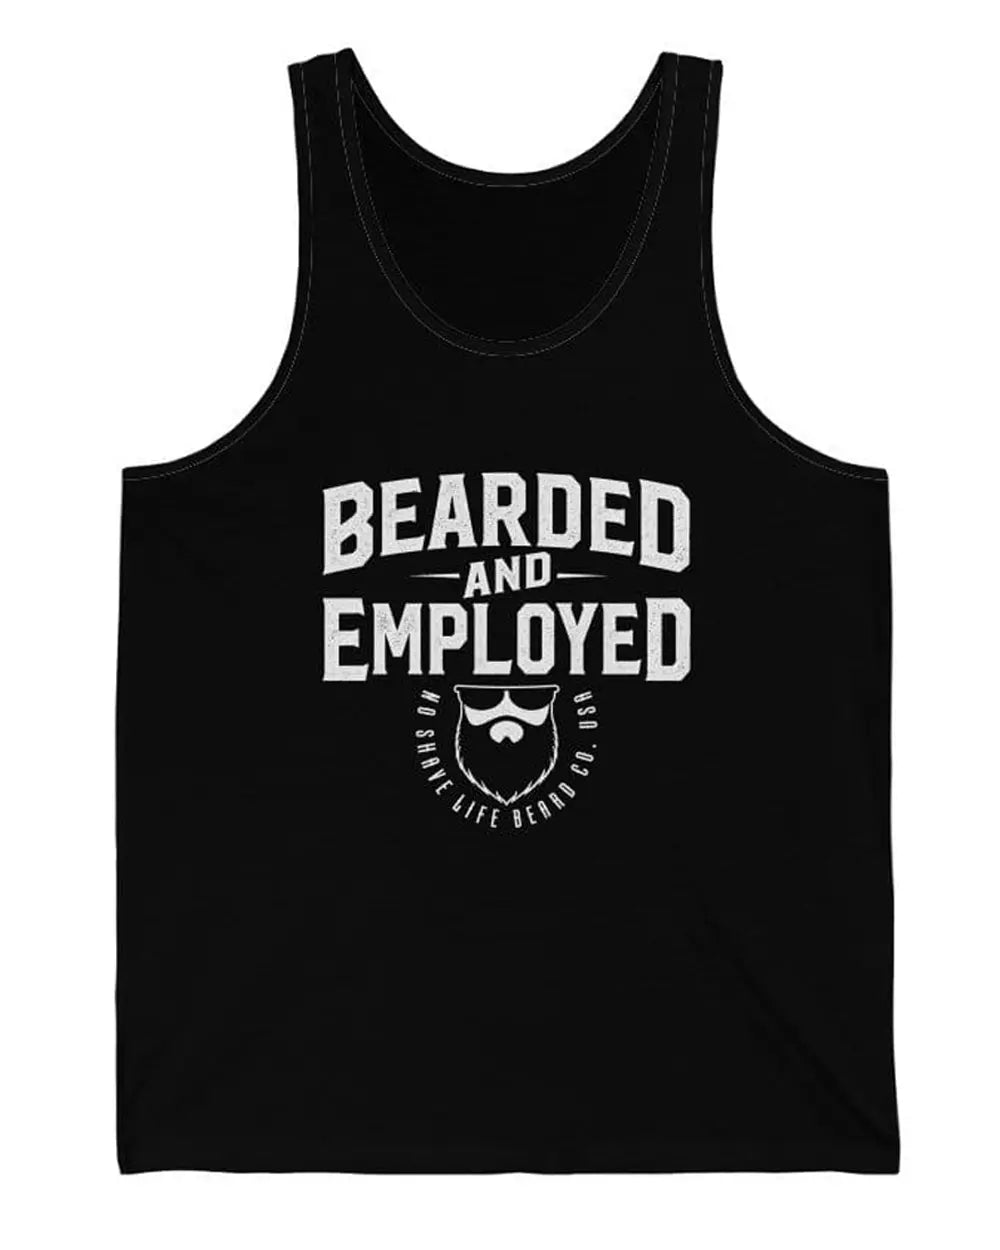 Bearded and Employed Black Men's Tank Top|Mens Tank Top